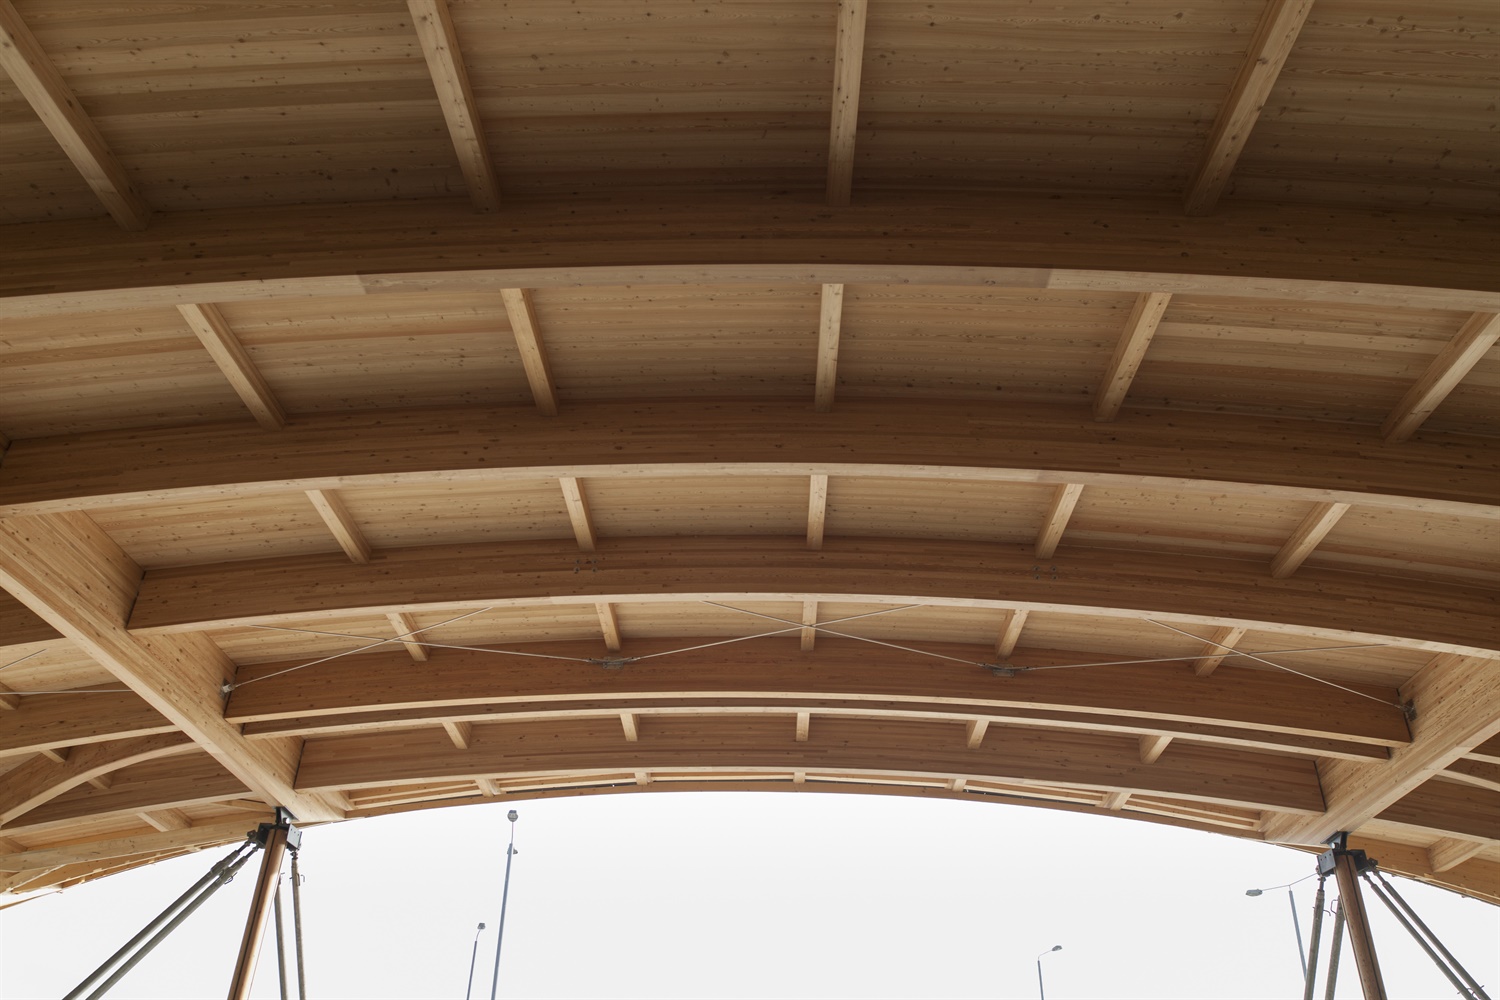 Timber structure of the roof for Elizabeth line Abbey Wood station 250712